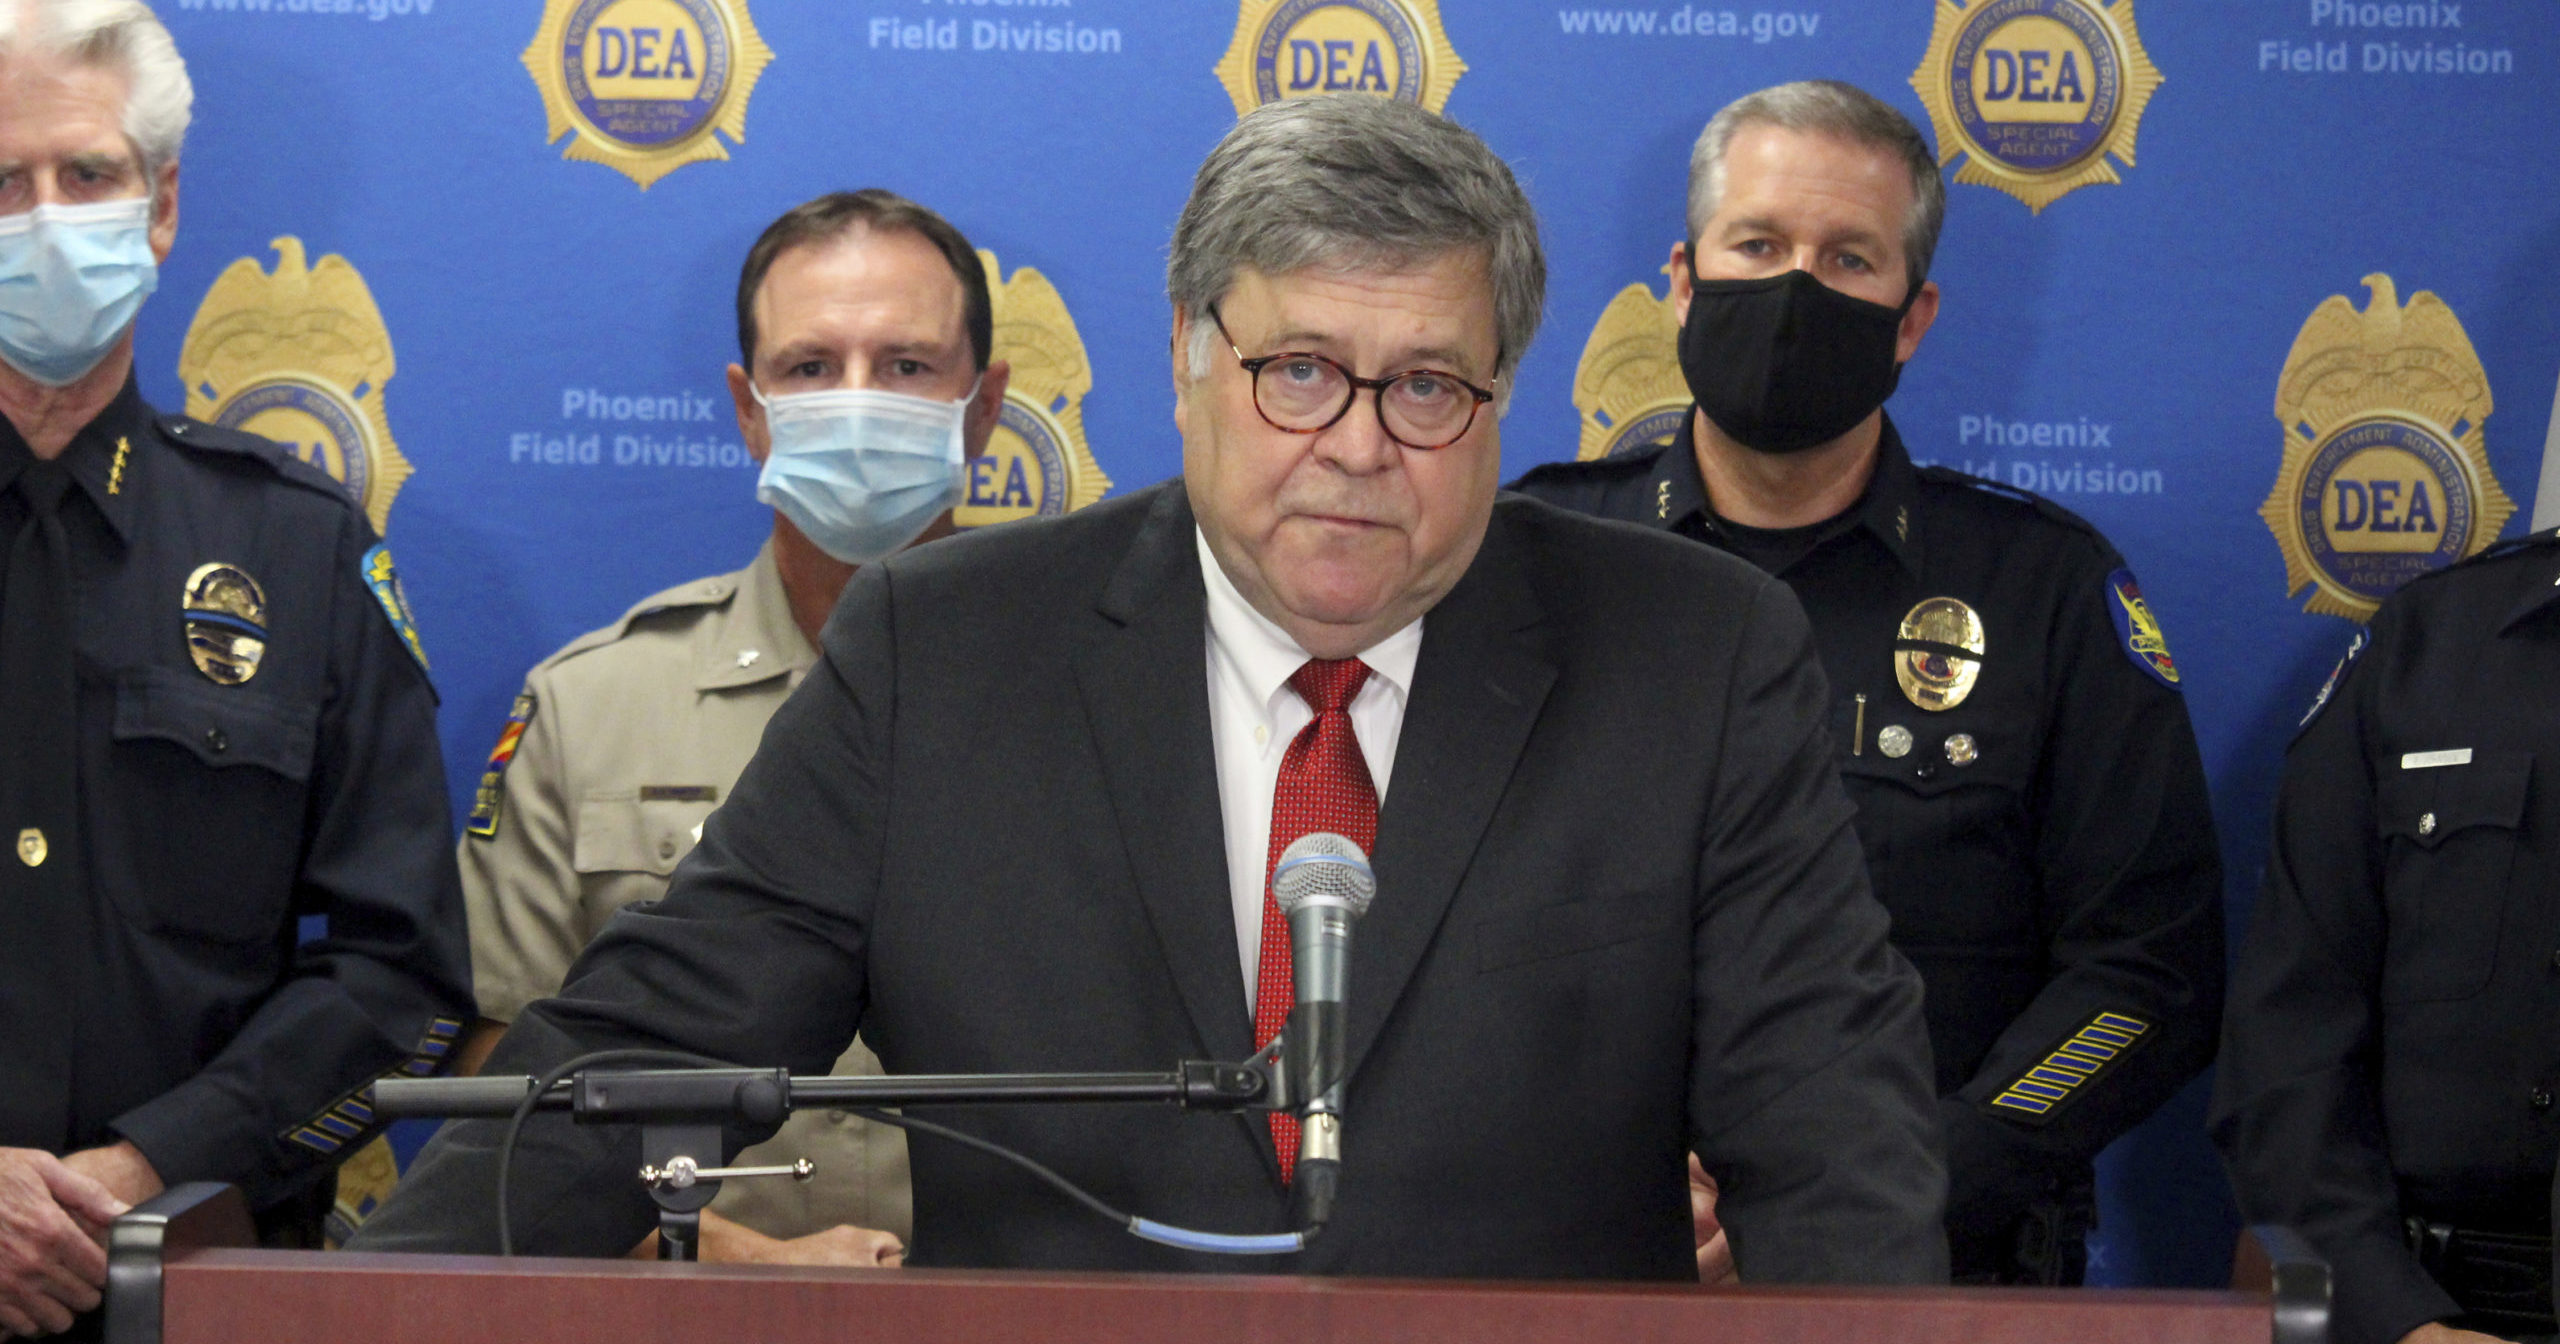 Attorney General William Barr speaks at a news conference on Sept. 10, 2020, in Phoenix.